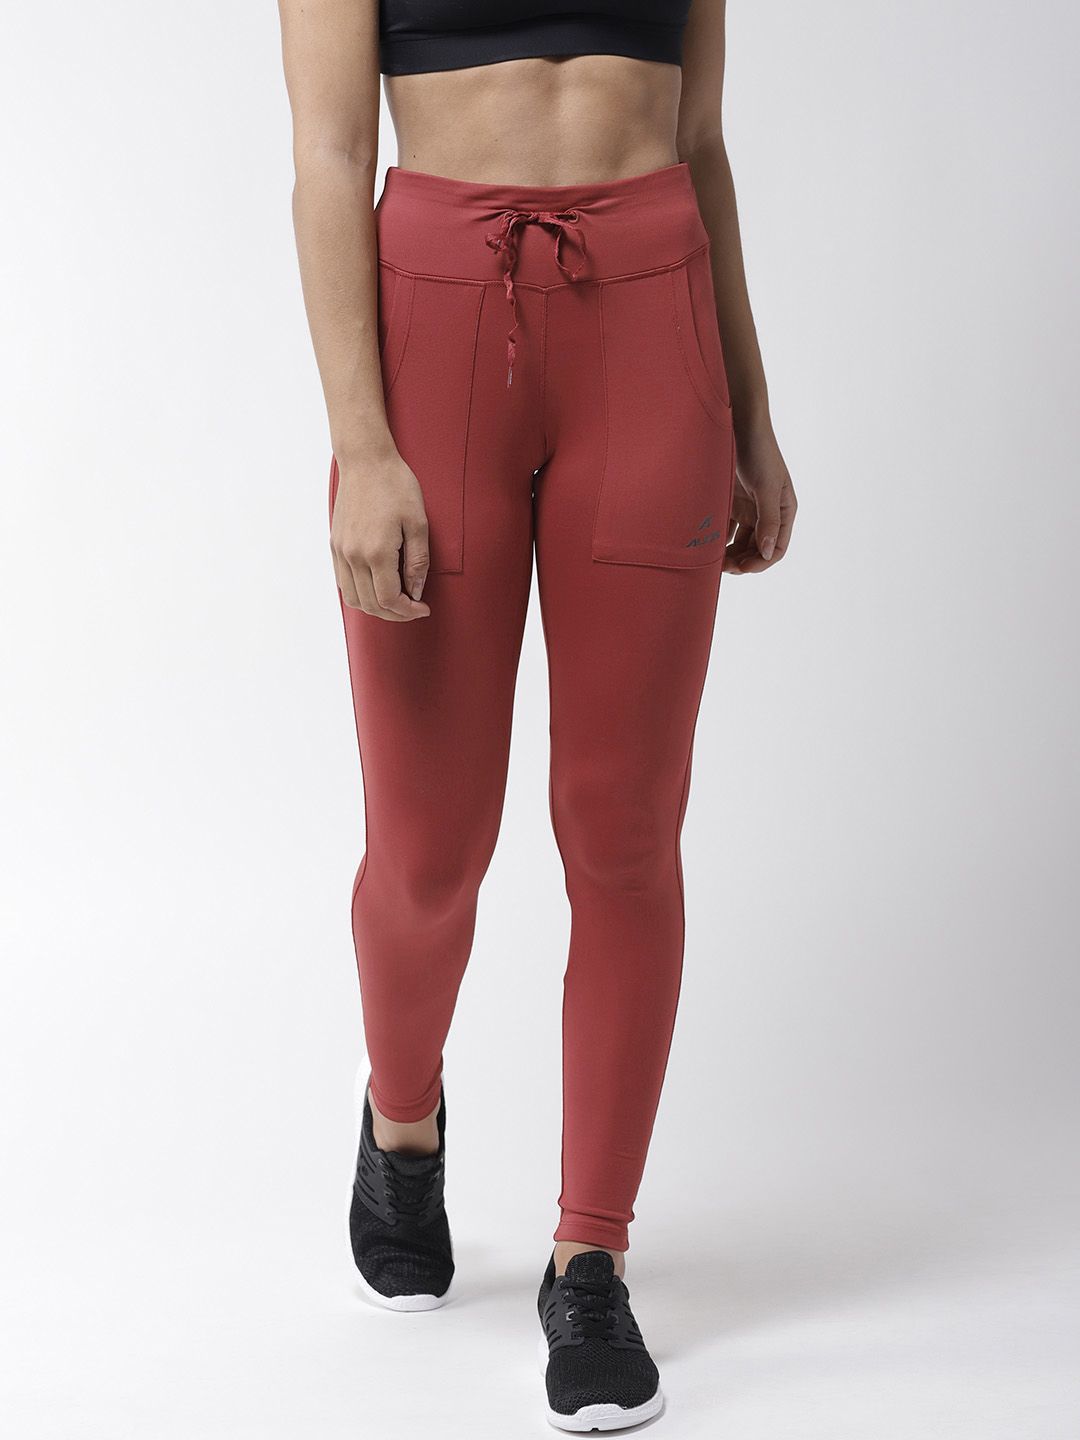 Alcis Women Rust Red Solid Tights Price in India